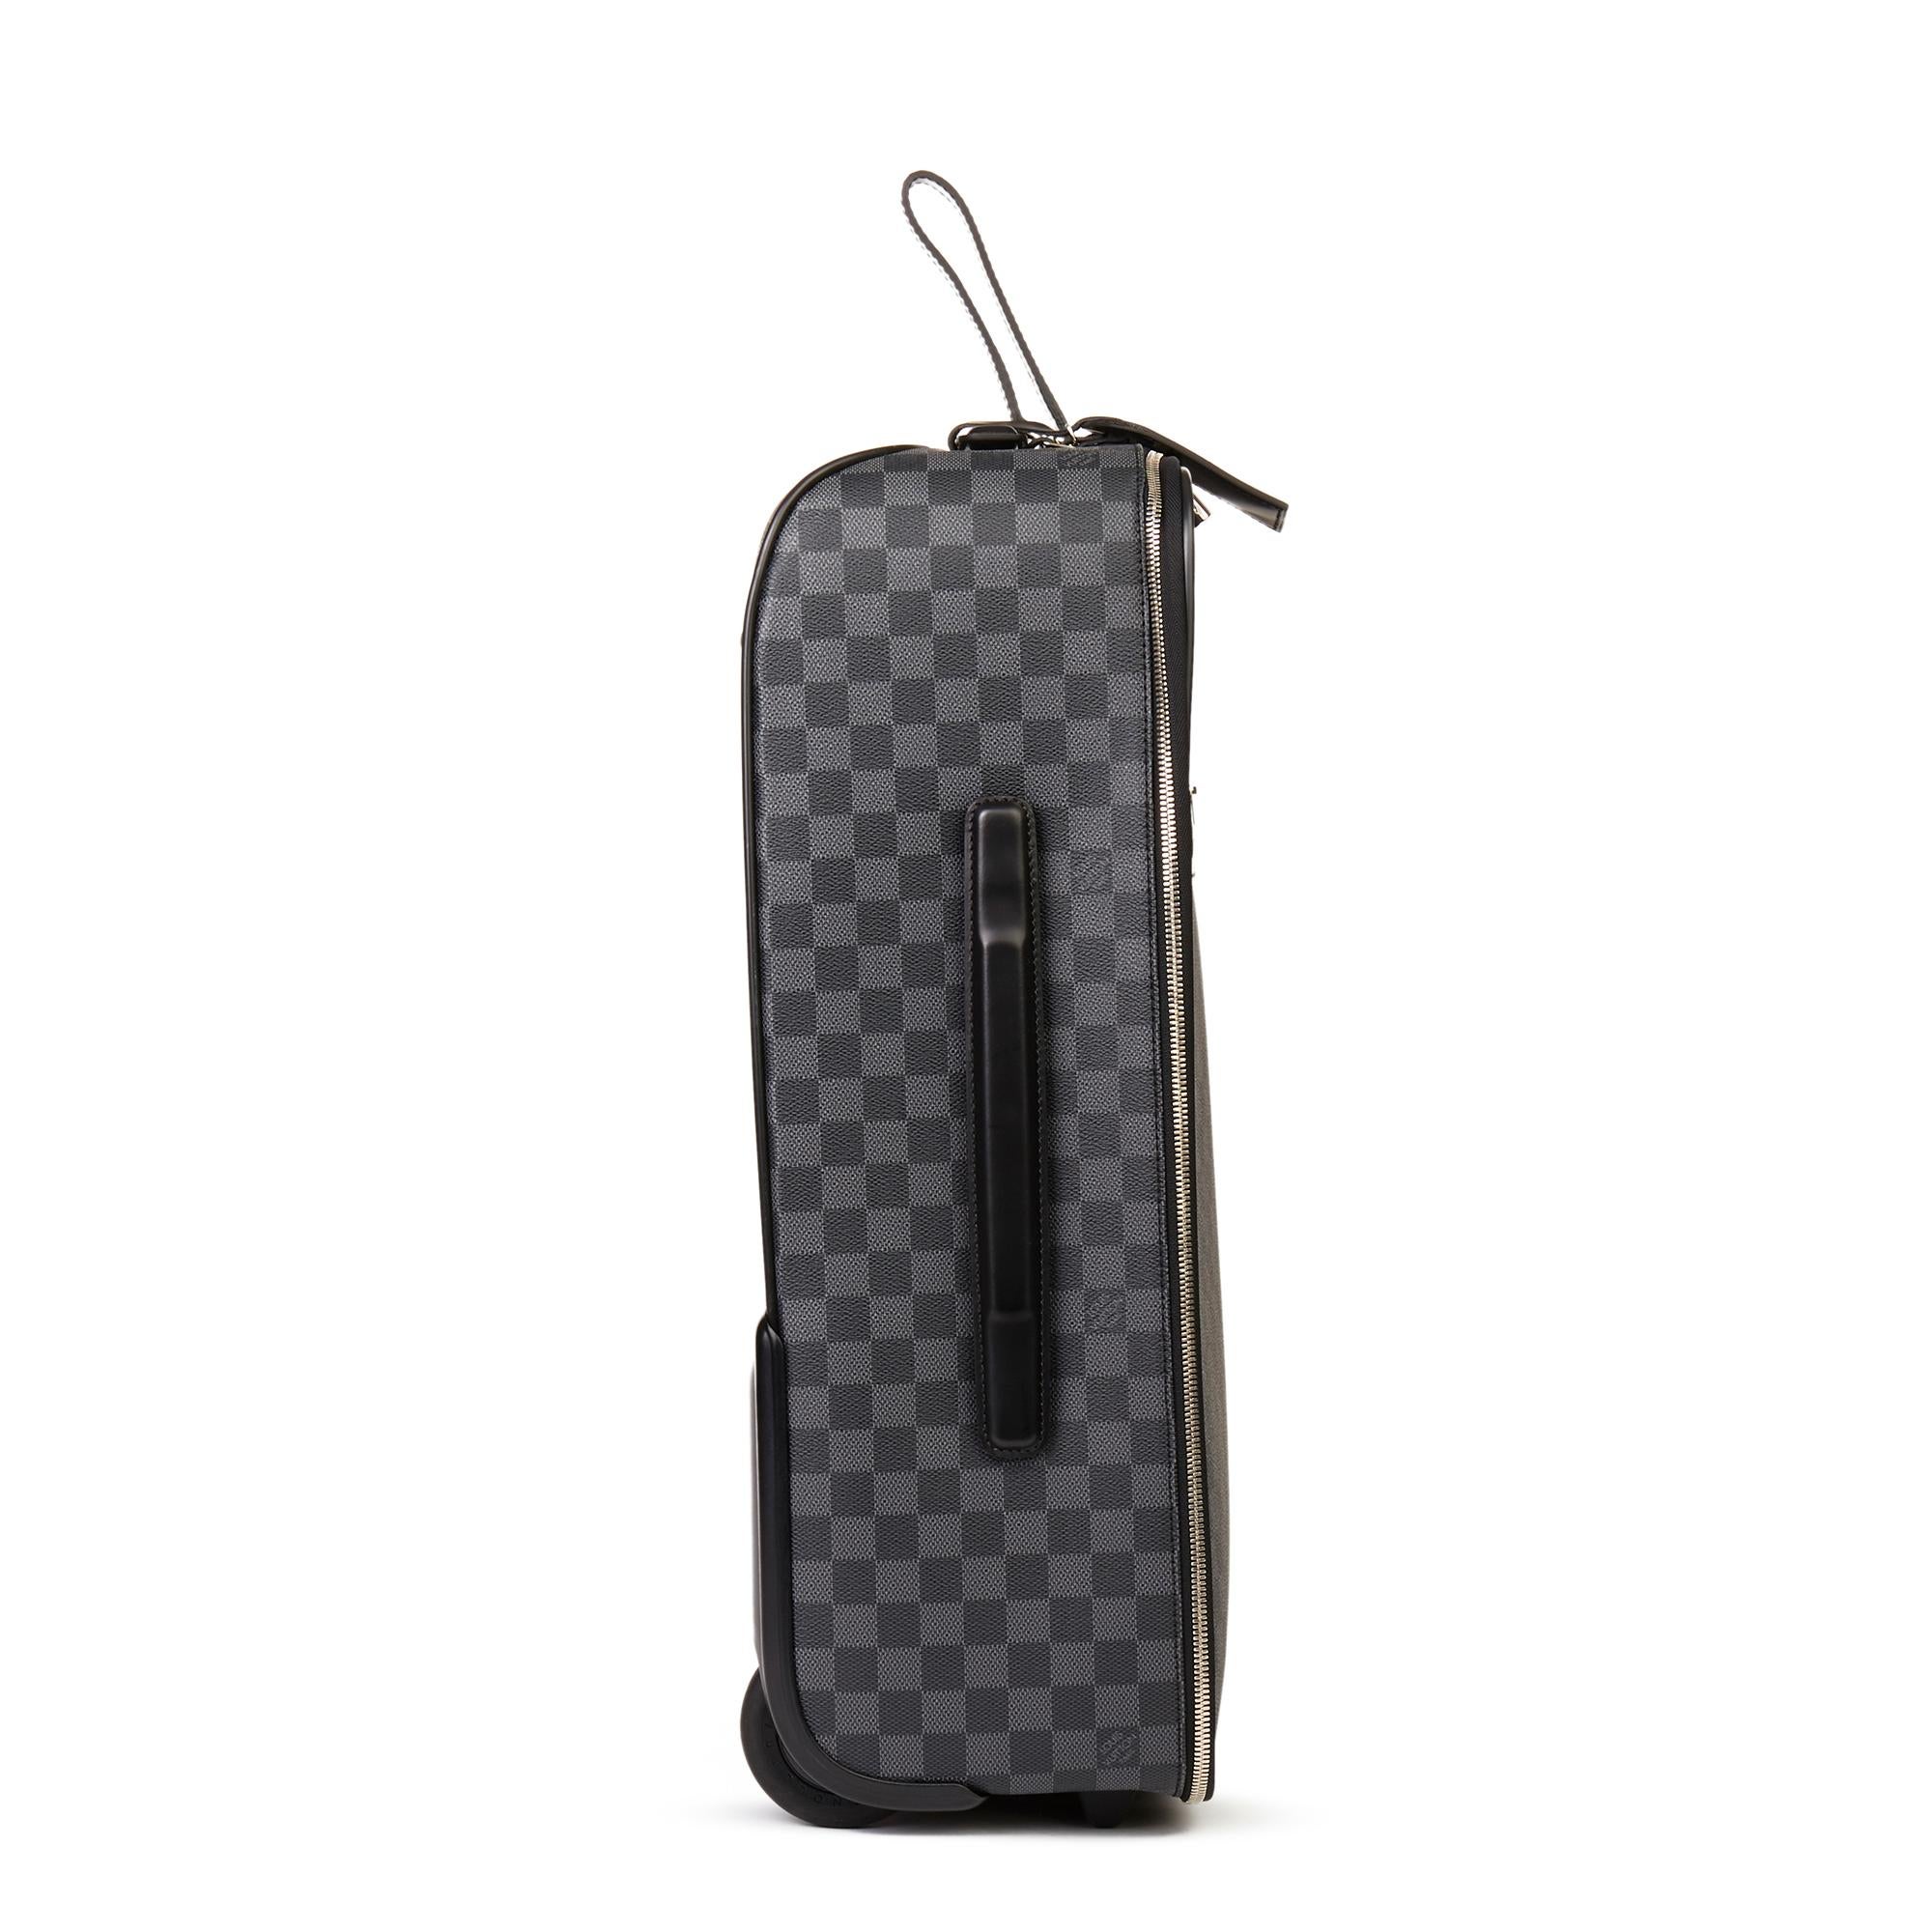 LOUIS VUITTON
Graphite Damier Coated Canvas Pégase Légère 55

Xupes Reference: HB3112
Serial Number: SP2100
Age (Circa): 2010
Accompanied By: Louis Vuitton Protective Cover, Suit Cover, Luggage Tag, Padlock, 2 X Keys
Authenticity Details: Date Stamp